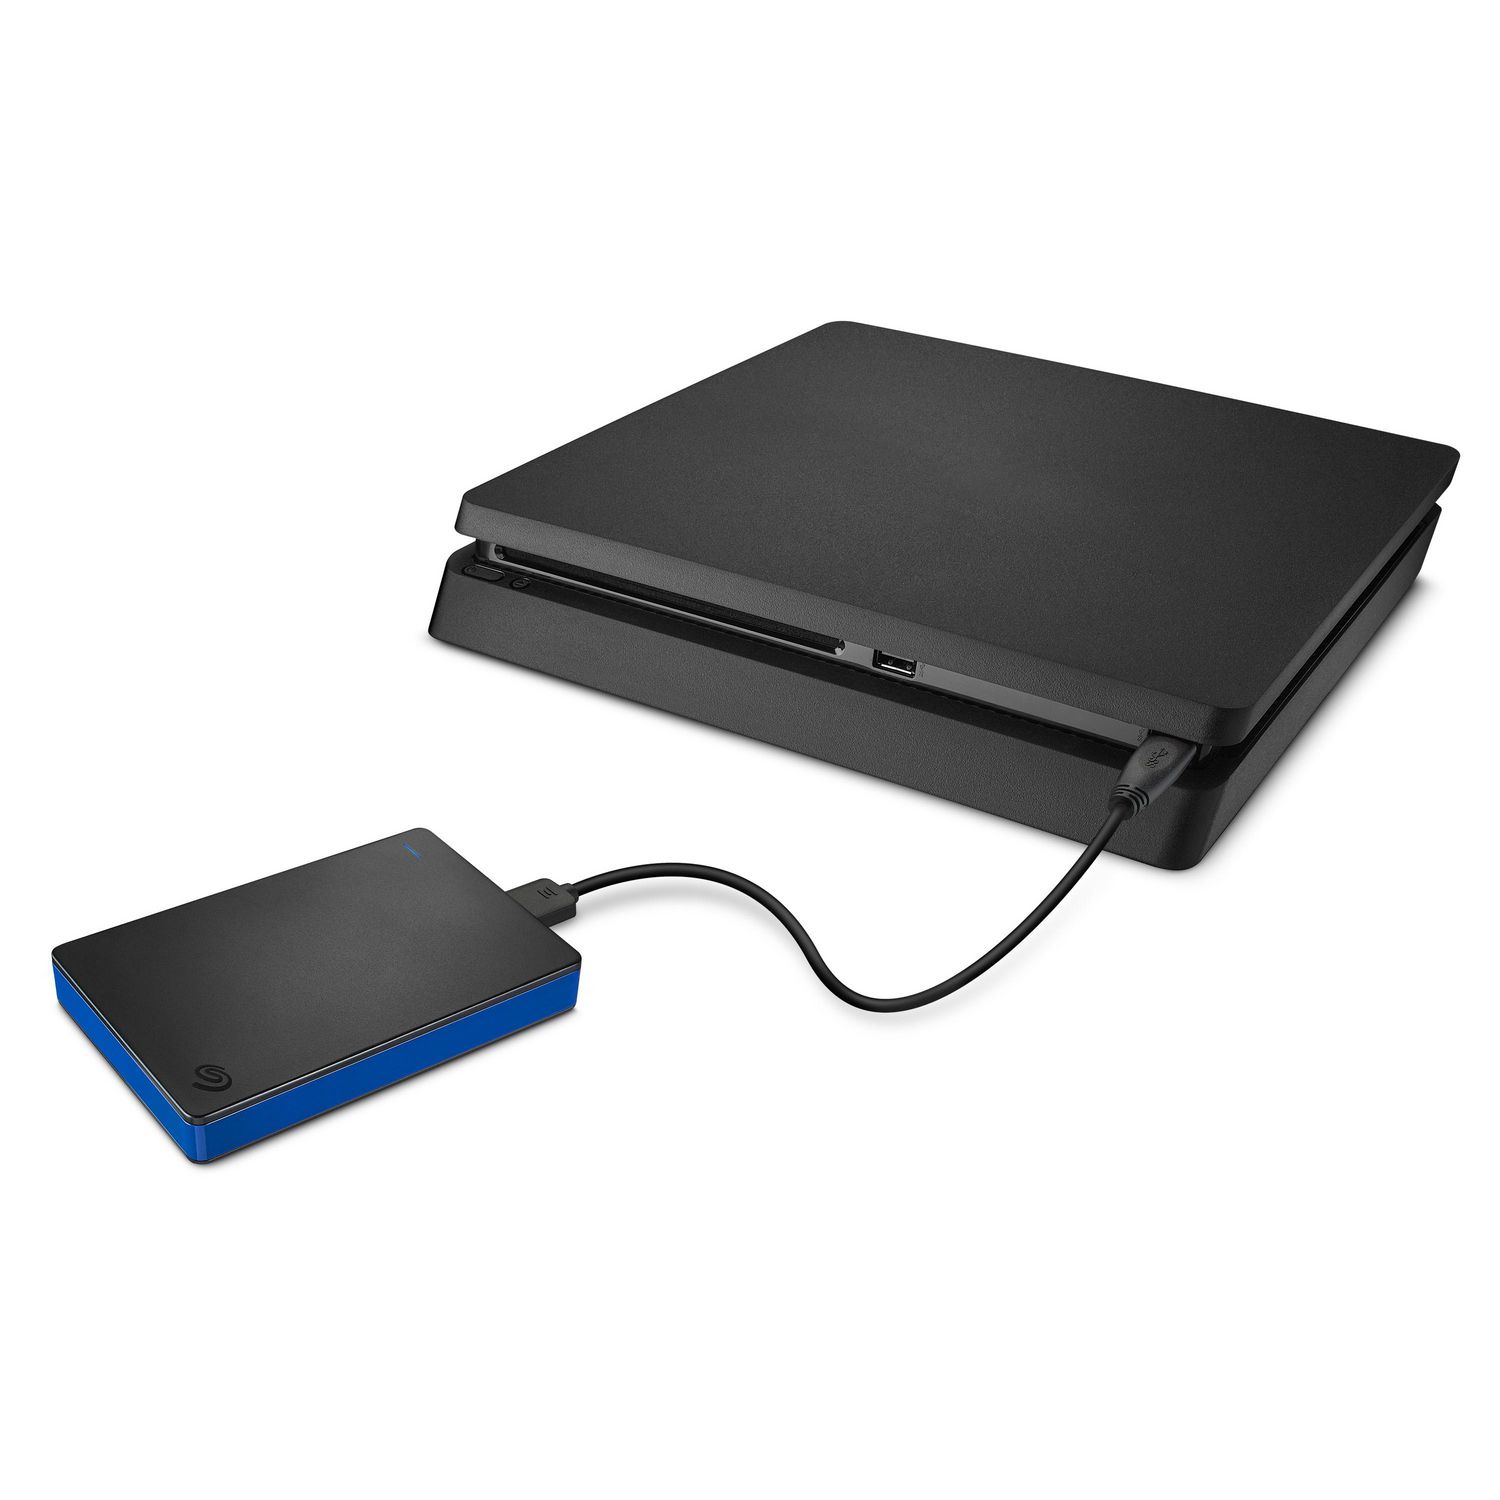 Game Drive for PlayStation 4TB External Hard Drive Portable HDD -  (STGD4000400) Blue/Black